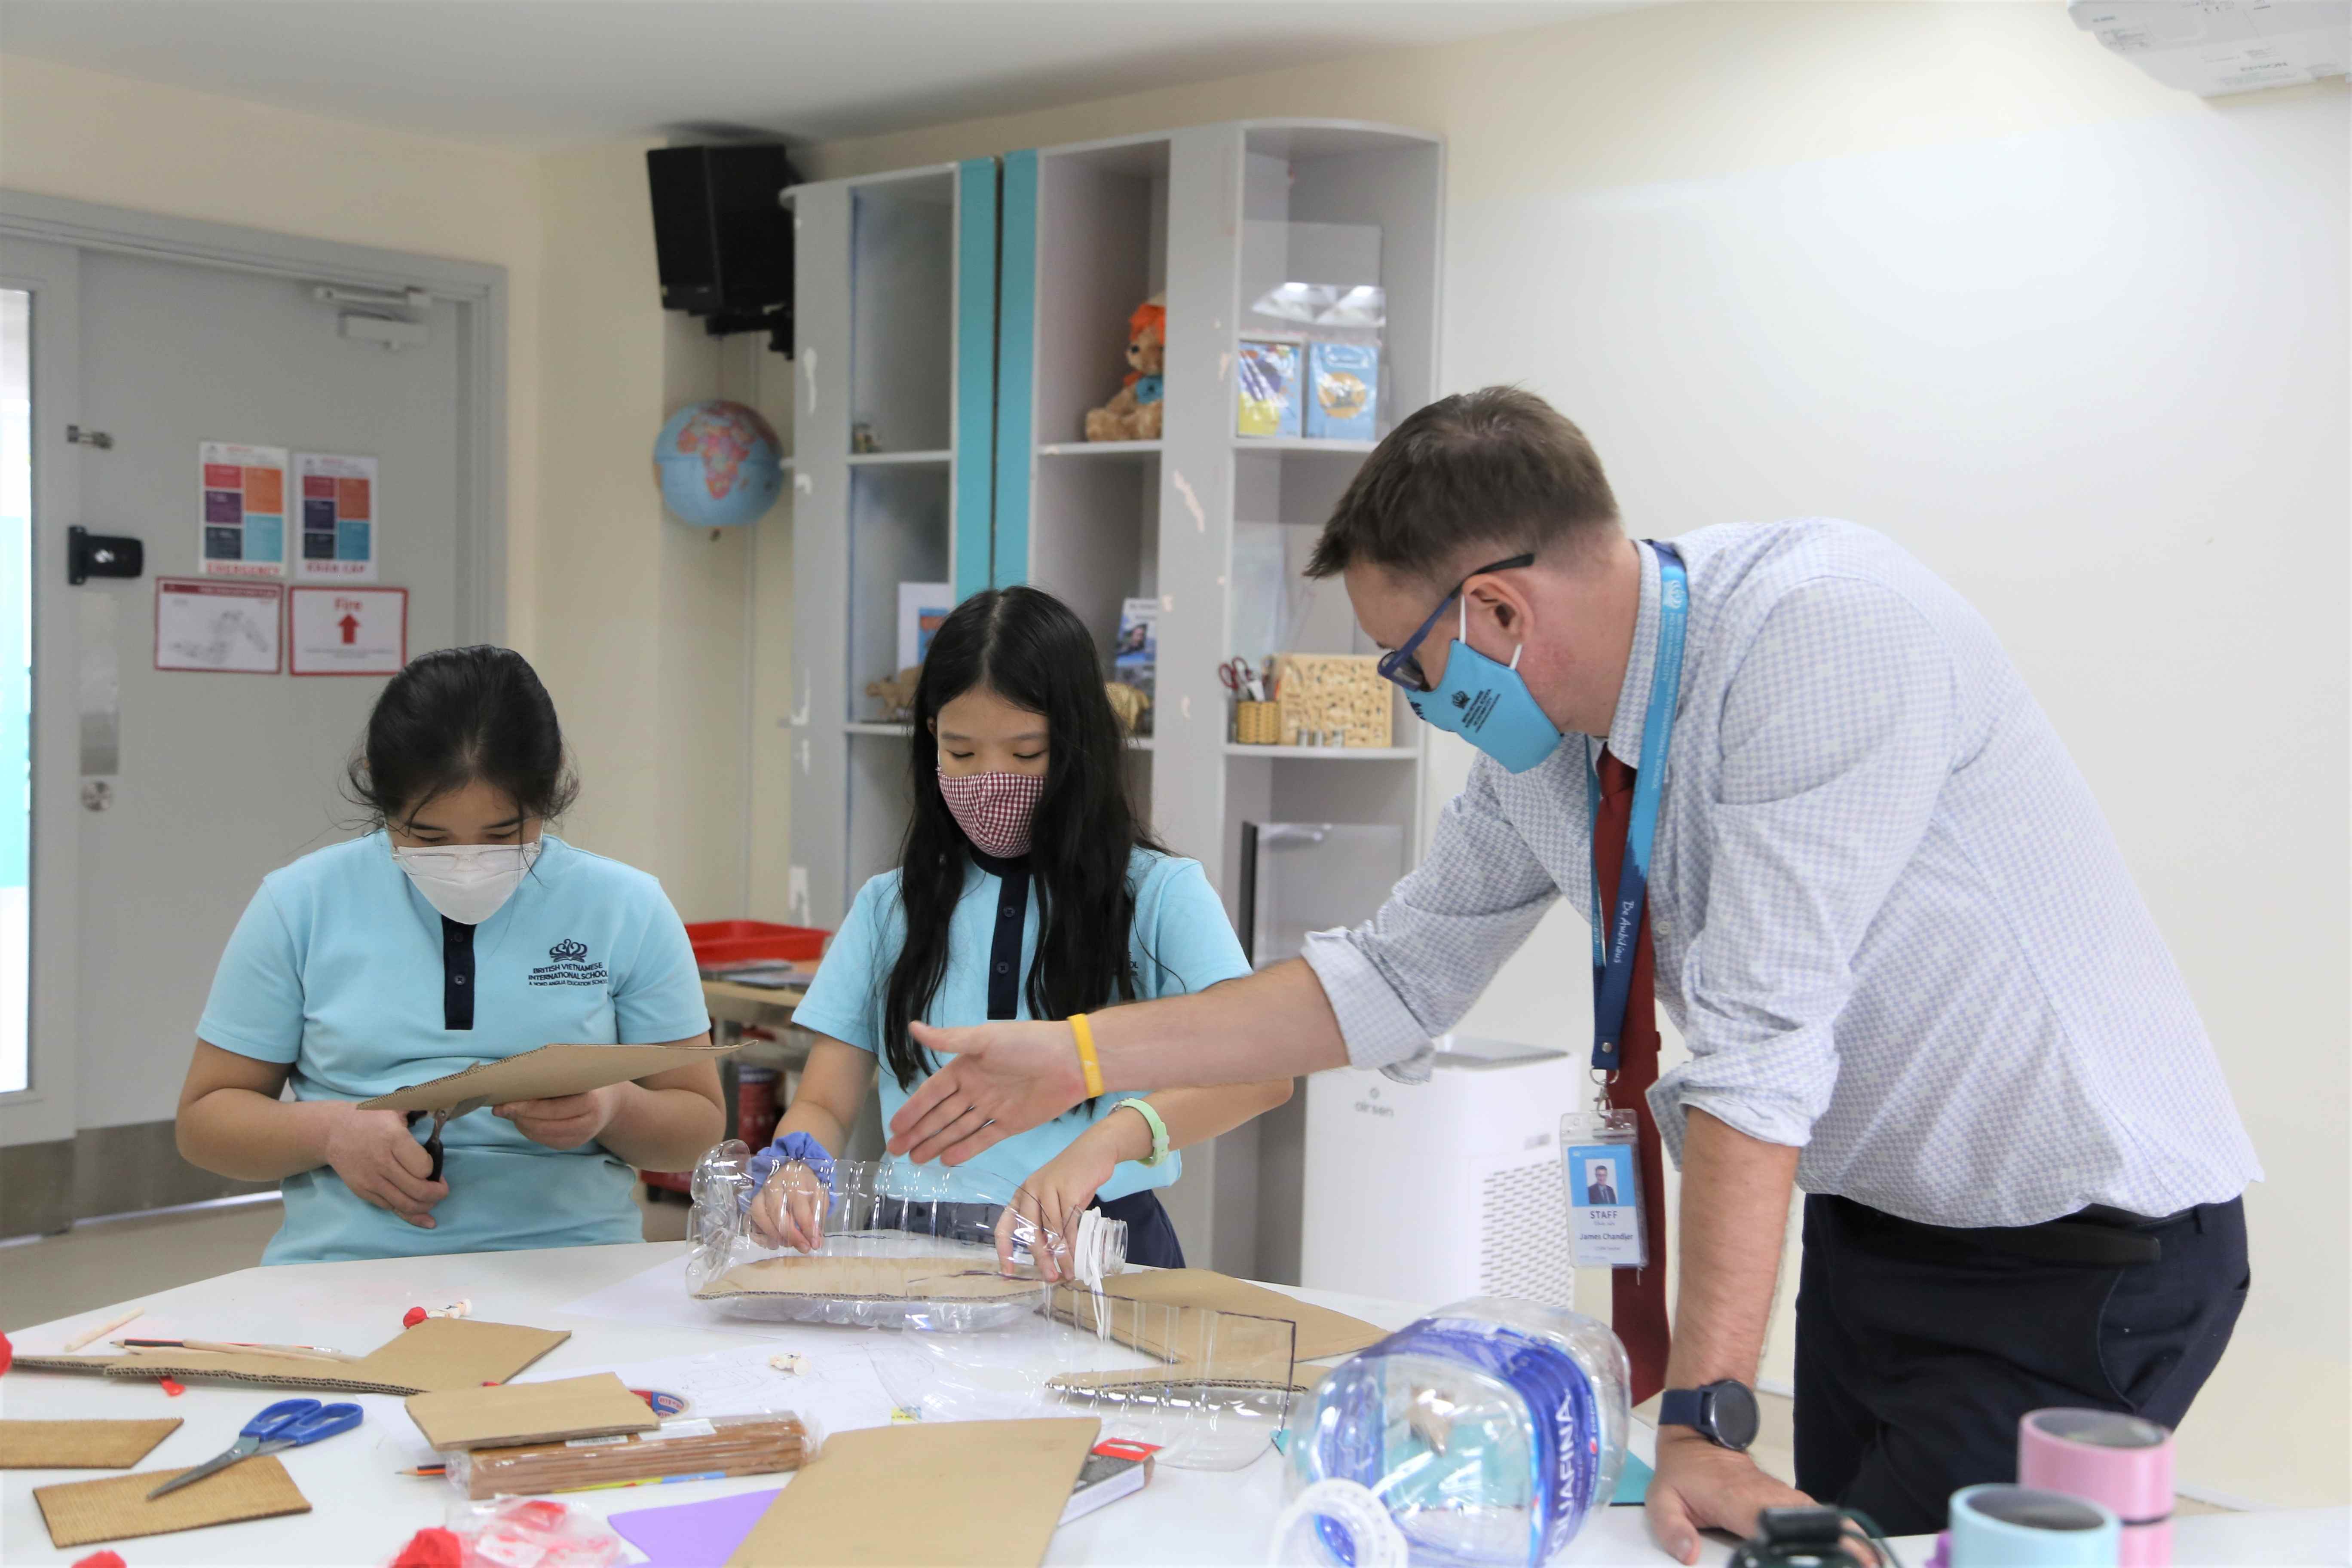 The Nord Anglia Education STEAM Festival - The Nord Anglia Education STEAM Festival